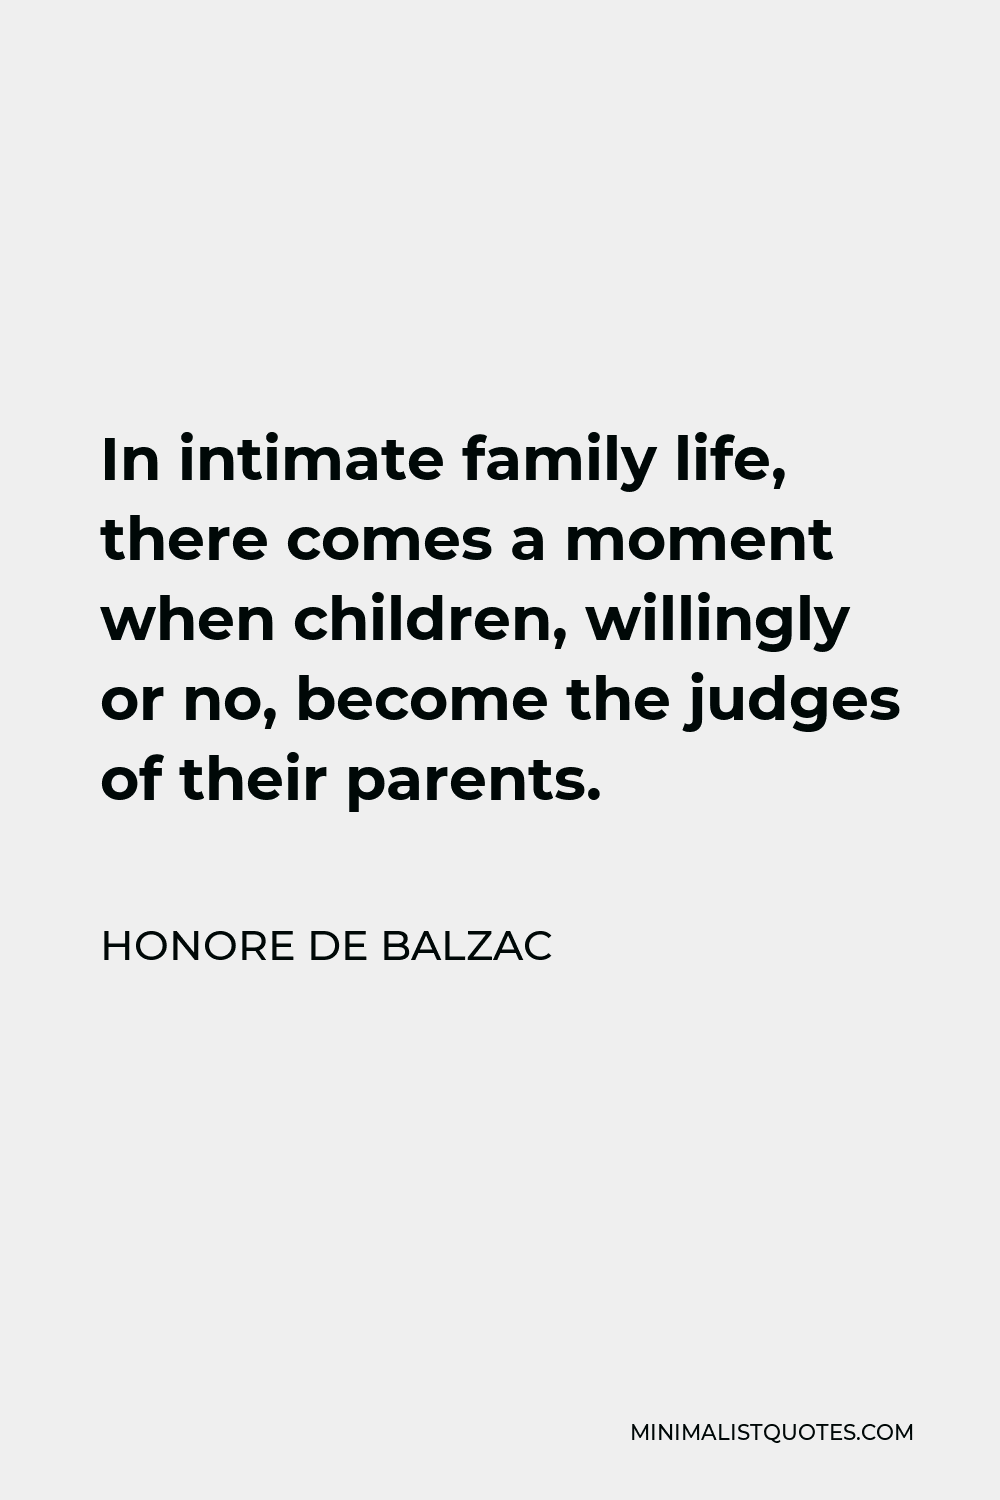 Honore de Balzac Quote - In intimate family life, there comes a moment when children, willingly or no, become the judges of their parents.